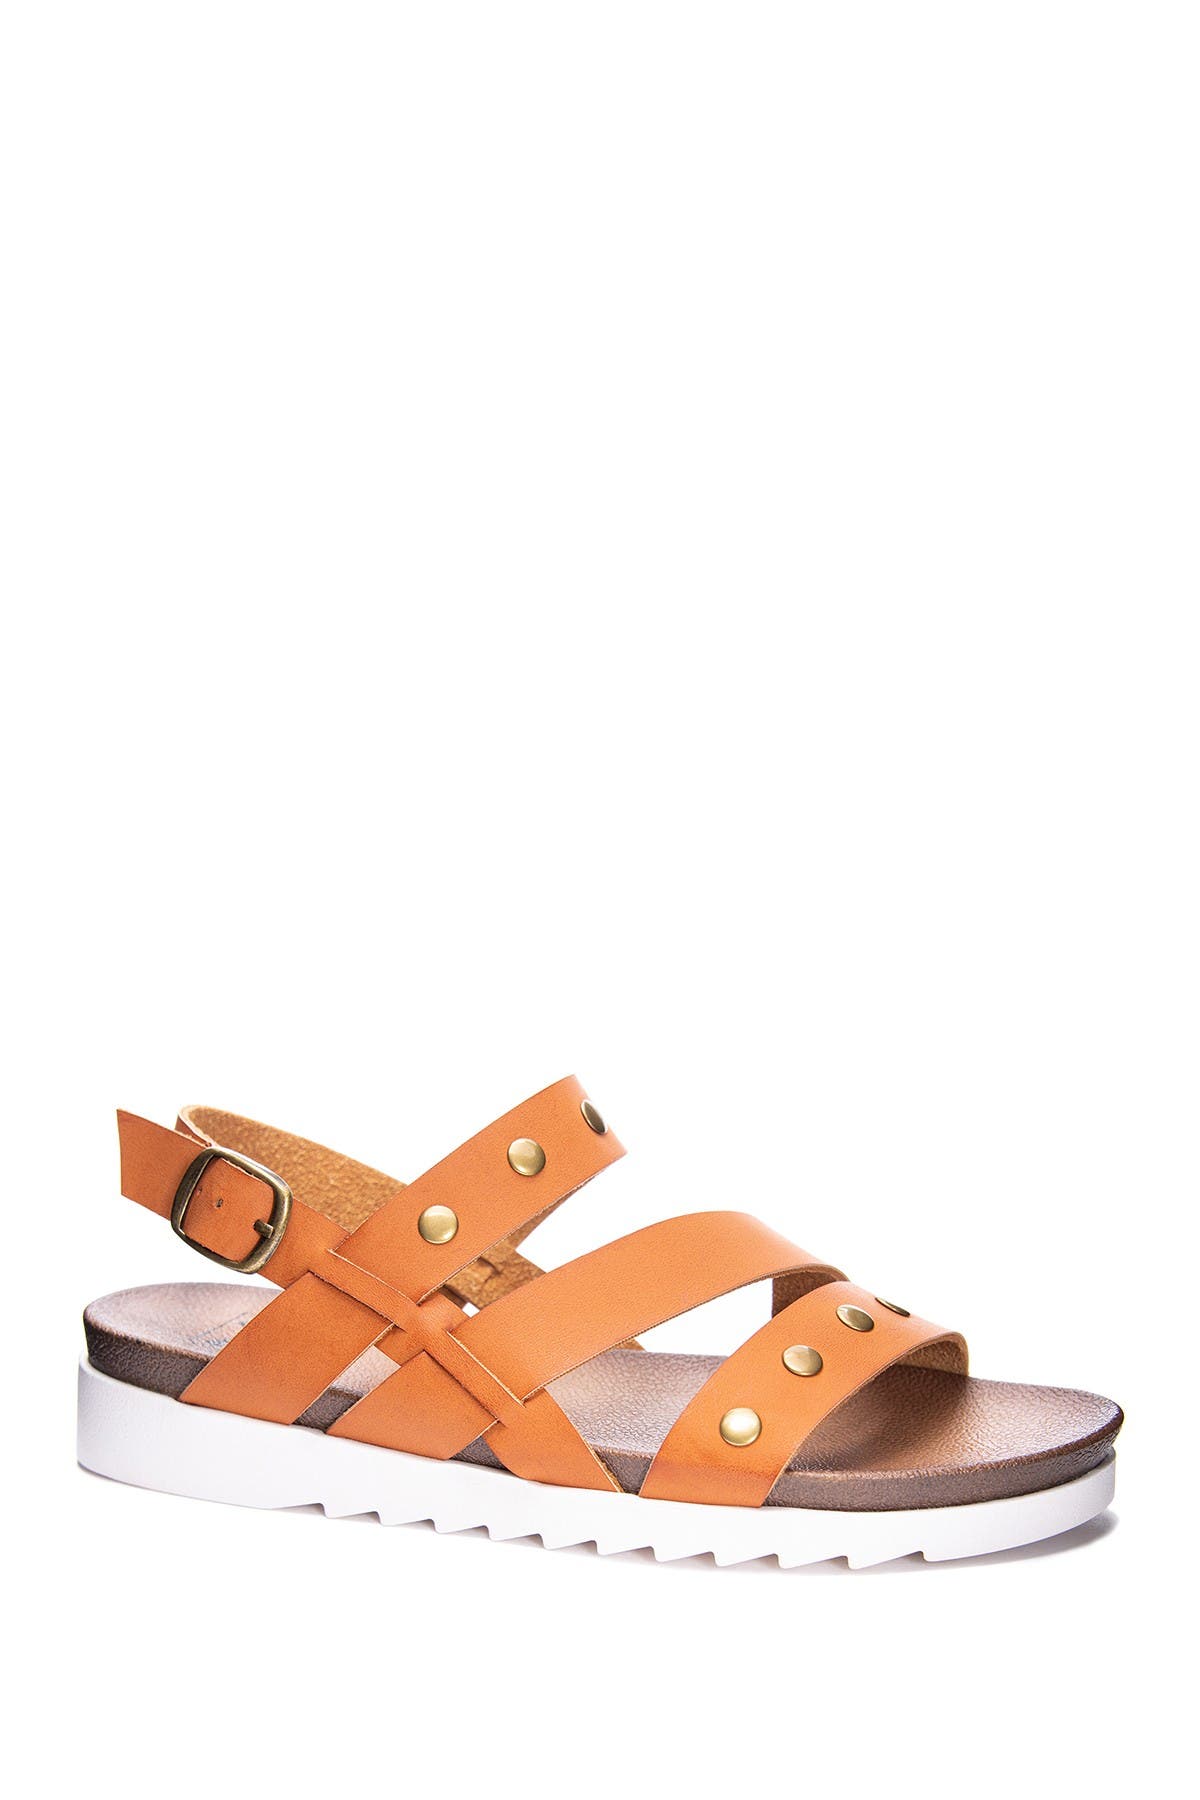 DIRTY LAUNDRY DIRTY LAUNDRY CEE CEE SANDAL,785719397978